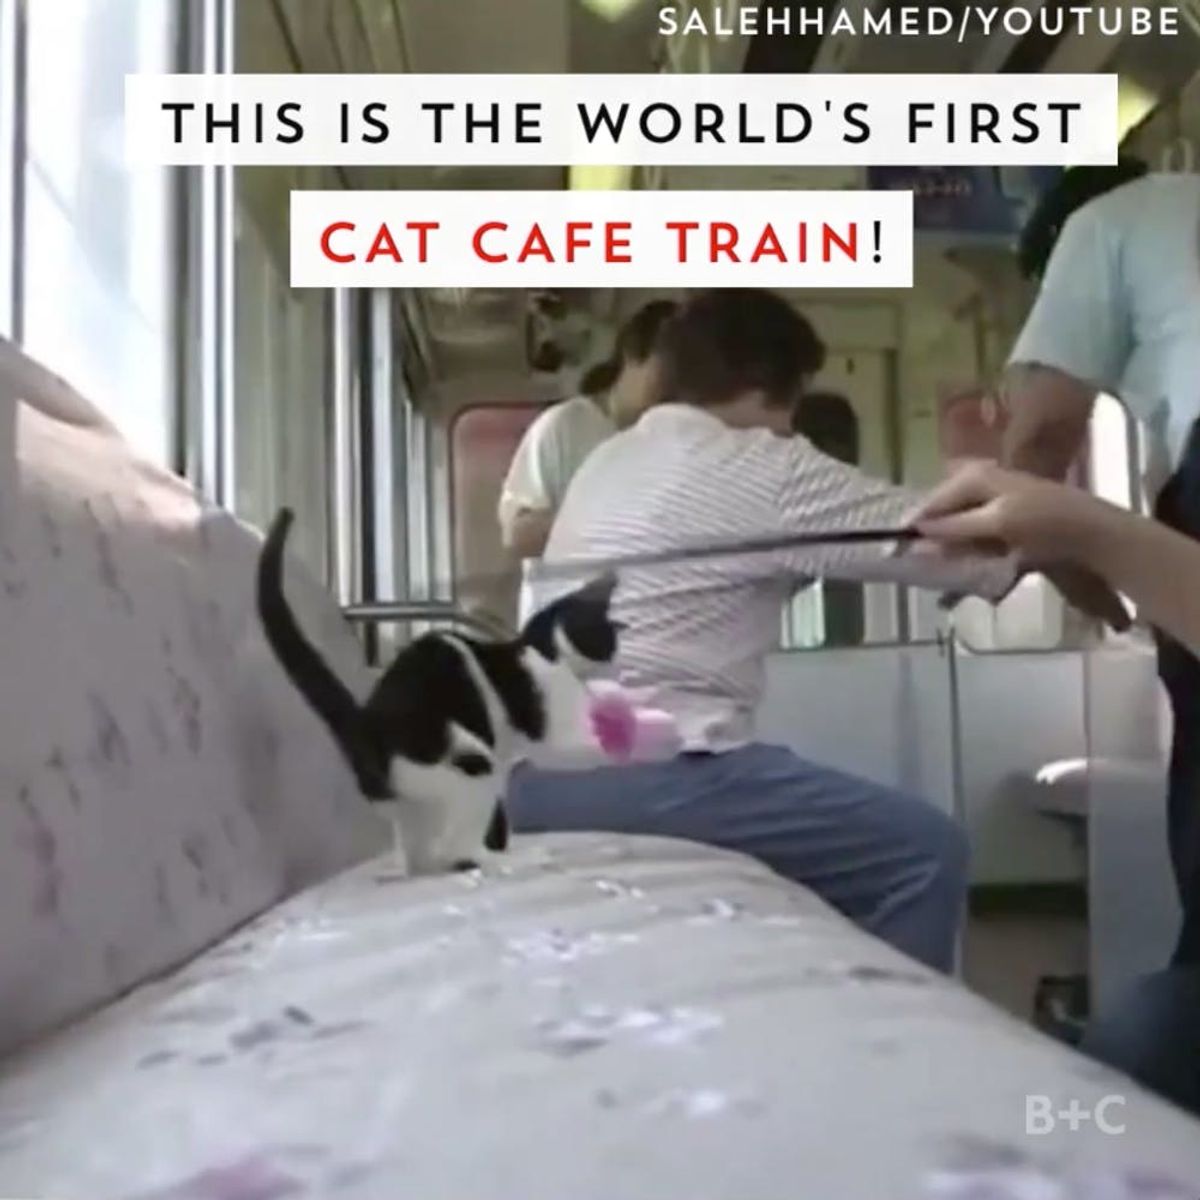 Travel Through Japan on a Train Filled With Kittens